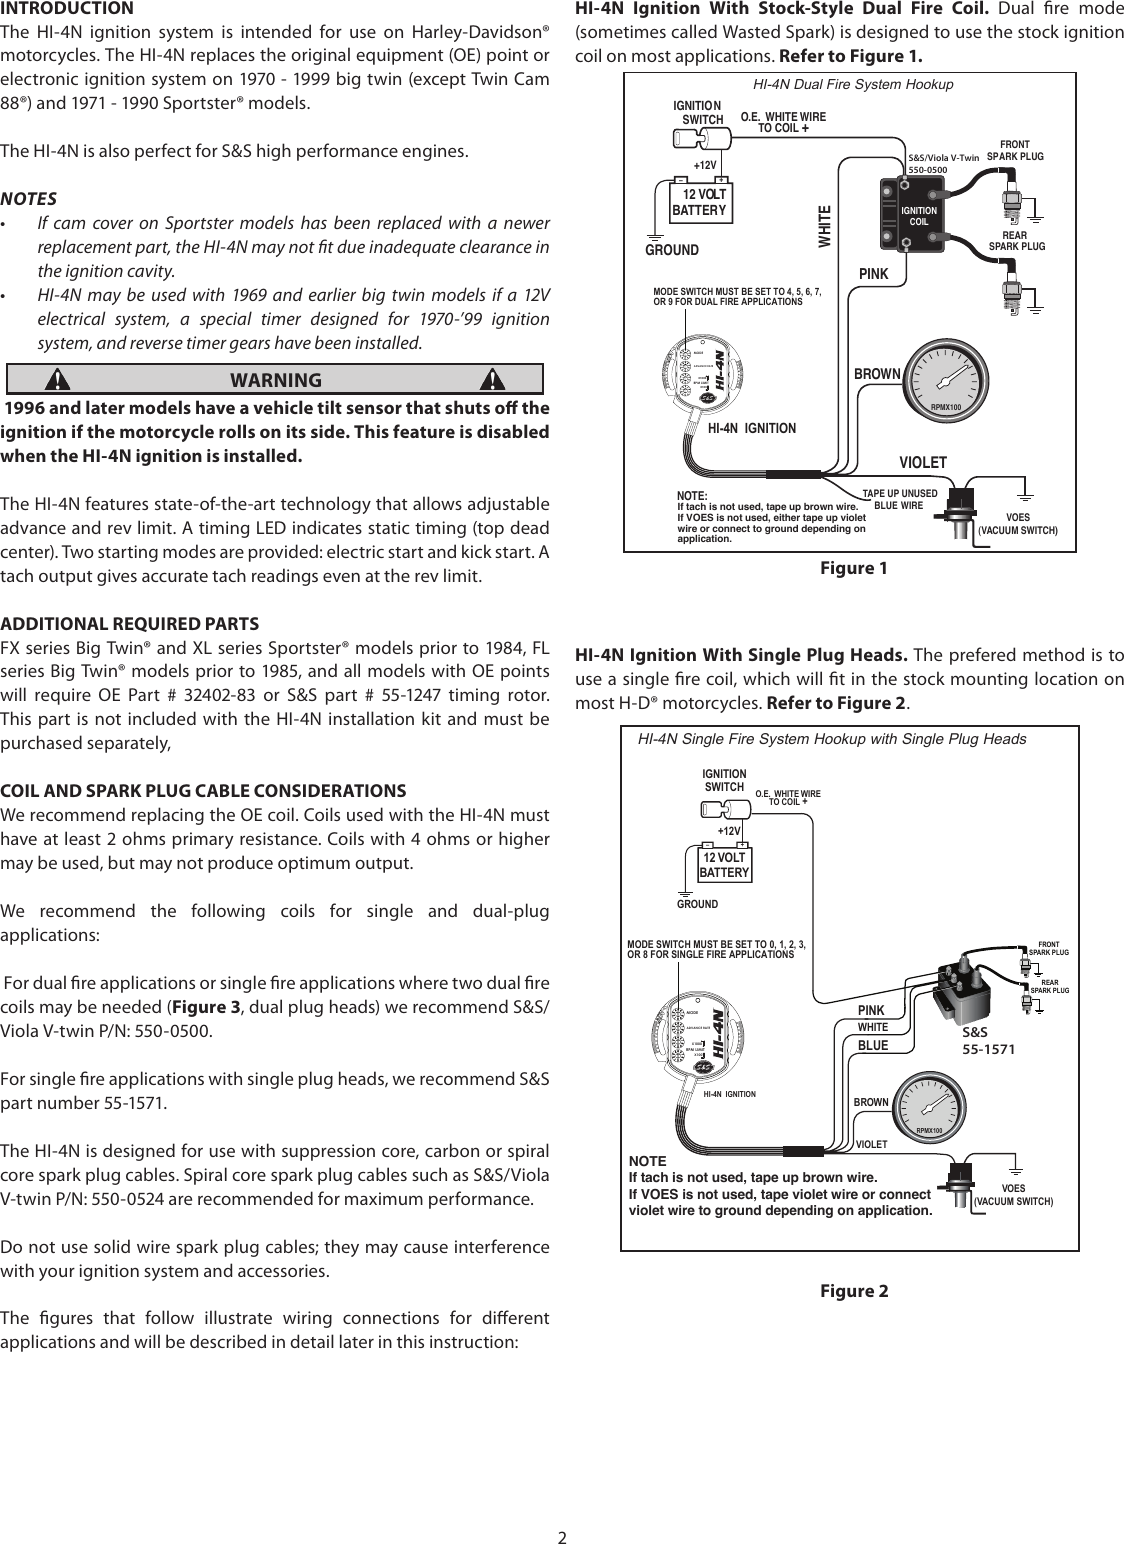 S&S Ignition Wiring Diagram from usermanual.wiki